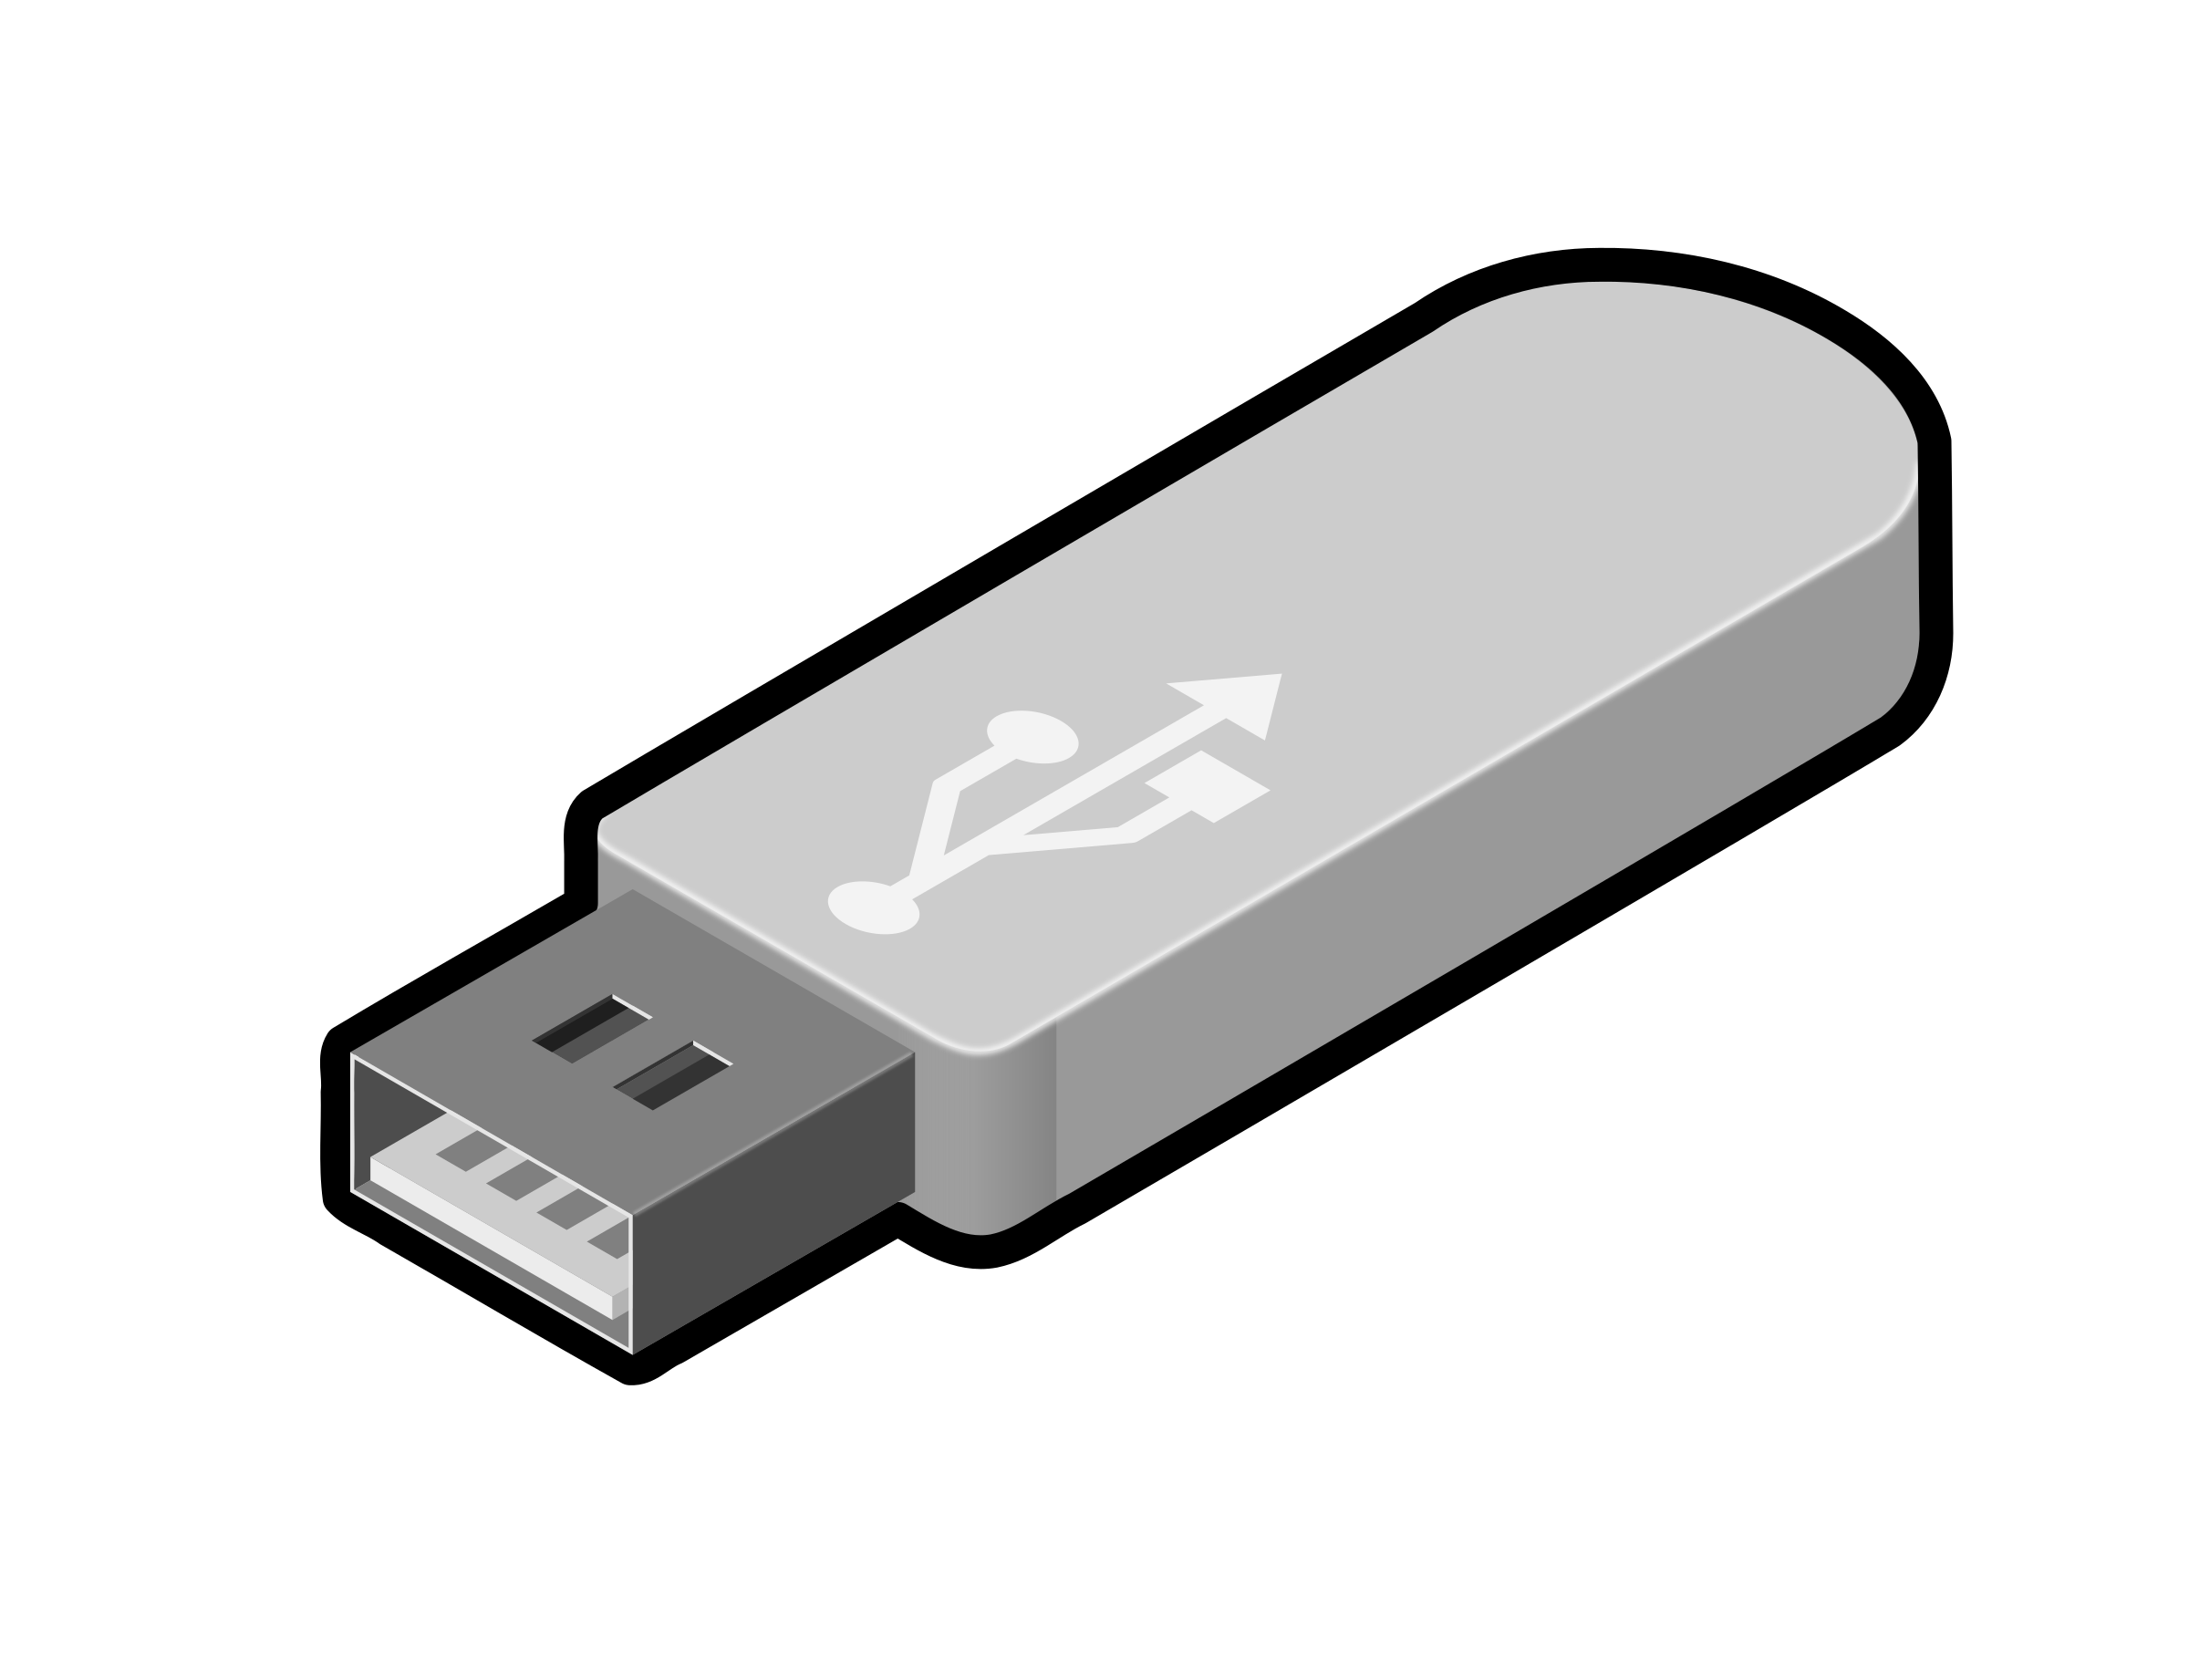 Pennant clipart stick. Computer pendrive free on